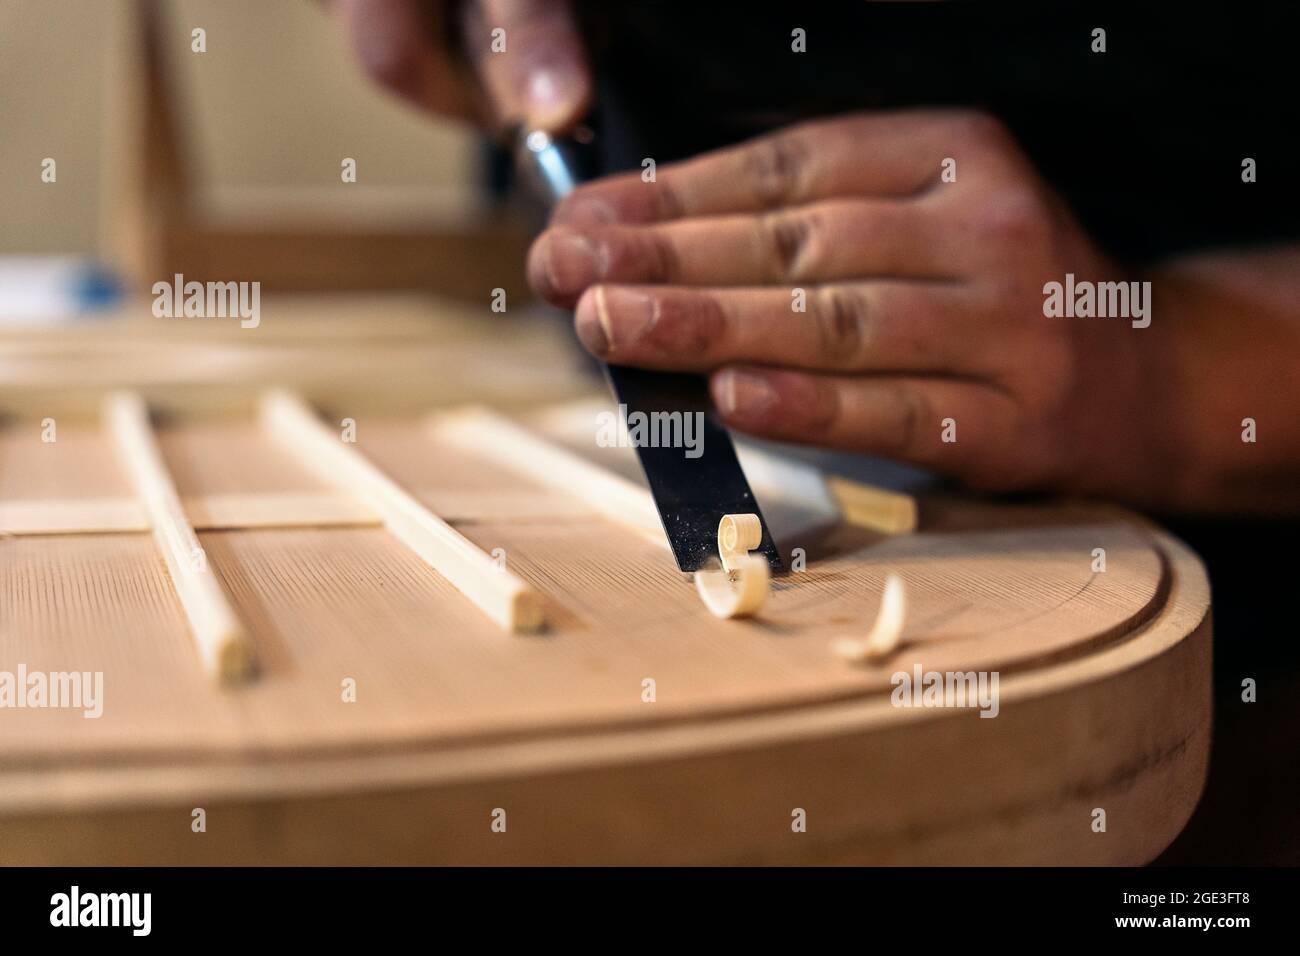 Unrecognized craftsman creating a guitar and using tools in a traditional workshop. Stock Photo